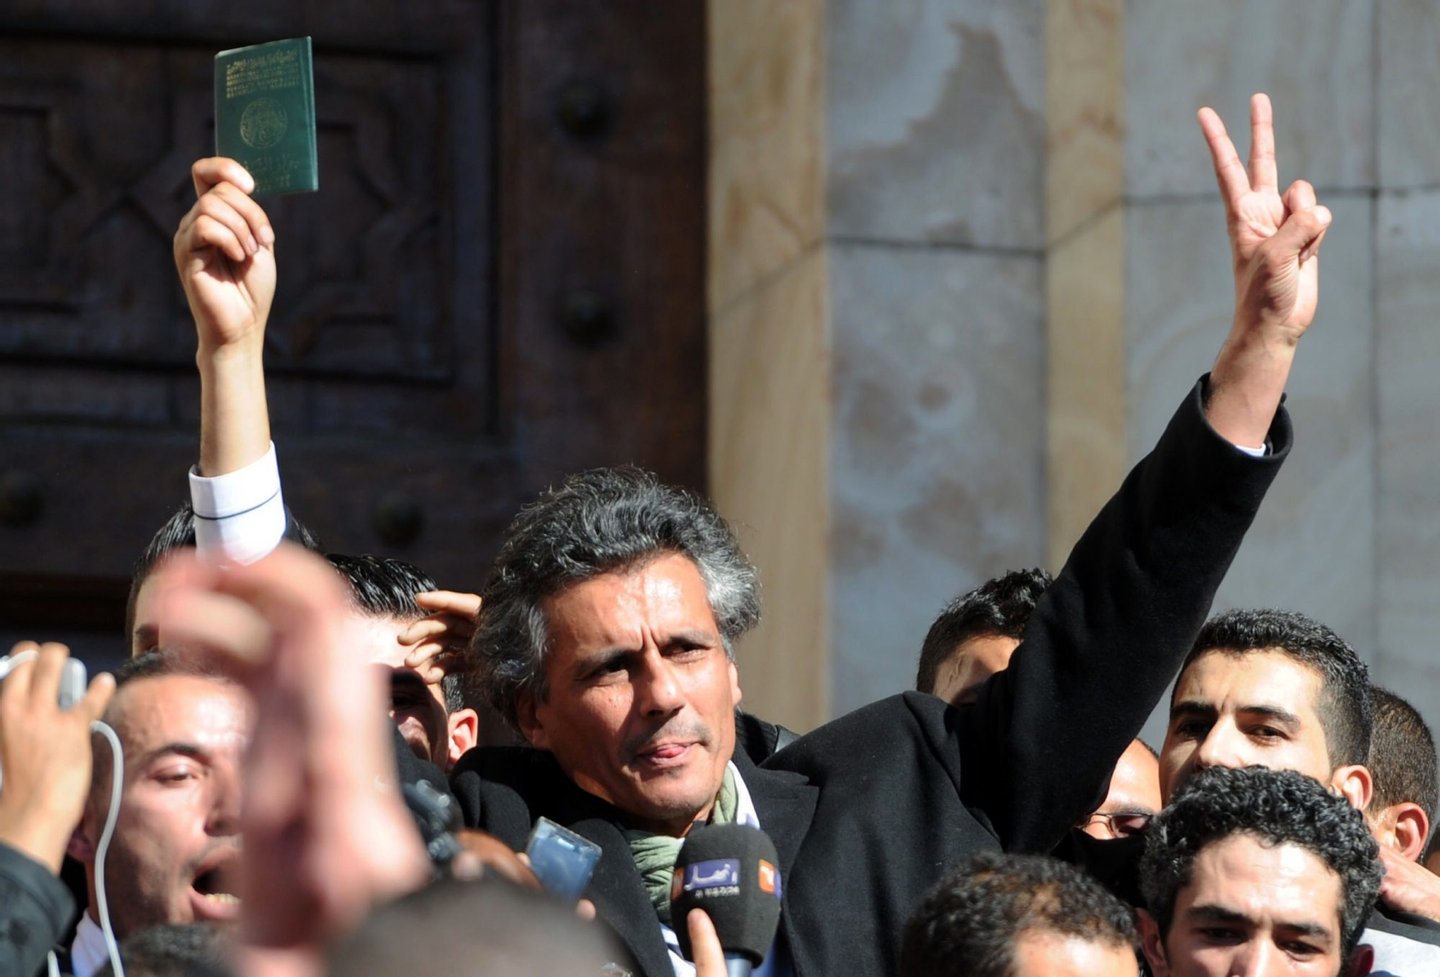 Rachid Nekkaz, who wanted to be candidate but couldn't register for Algeria's April 17 presidential election, flashes the sign of victory during a protest in his support in Algiers on March 8, 2014. Nekkaz said his candidature documents were stolen before he submits them at the constitutional council. AFP PHOTO / FAROUK BATICHE (Photo credit should read FAROUK BATICHE/AFP/Getty Images)